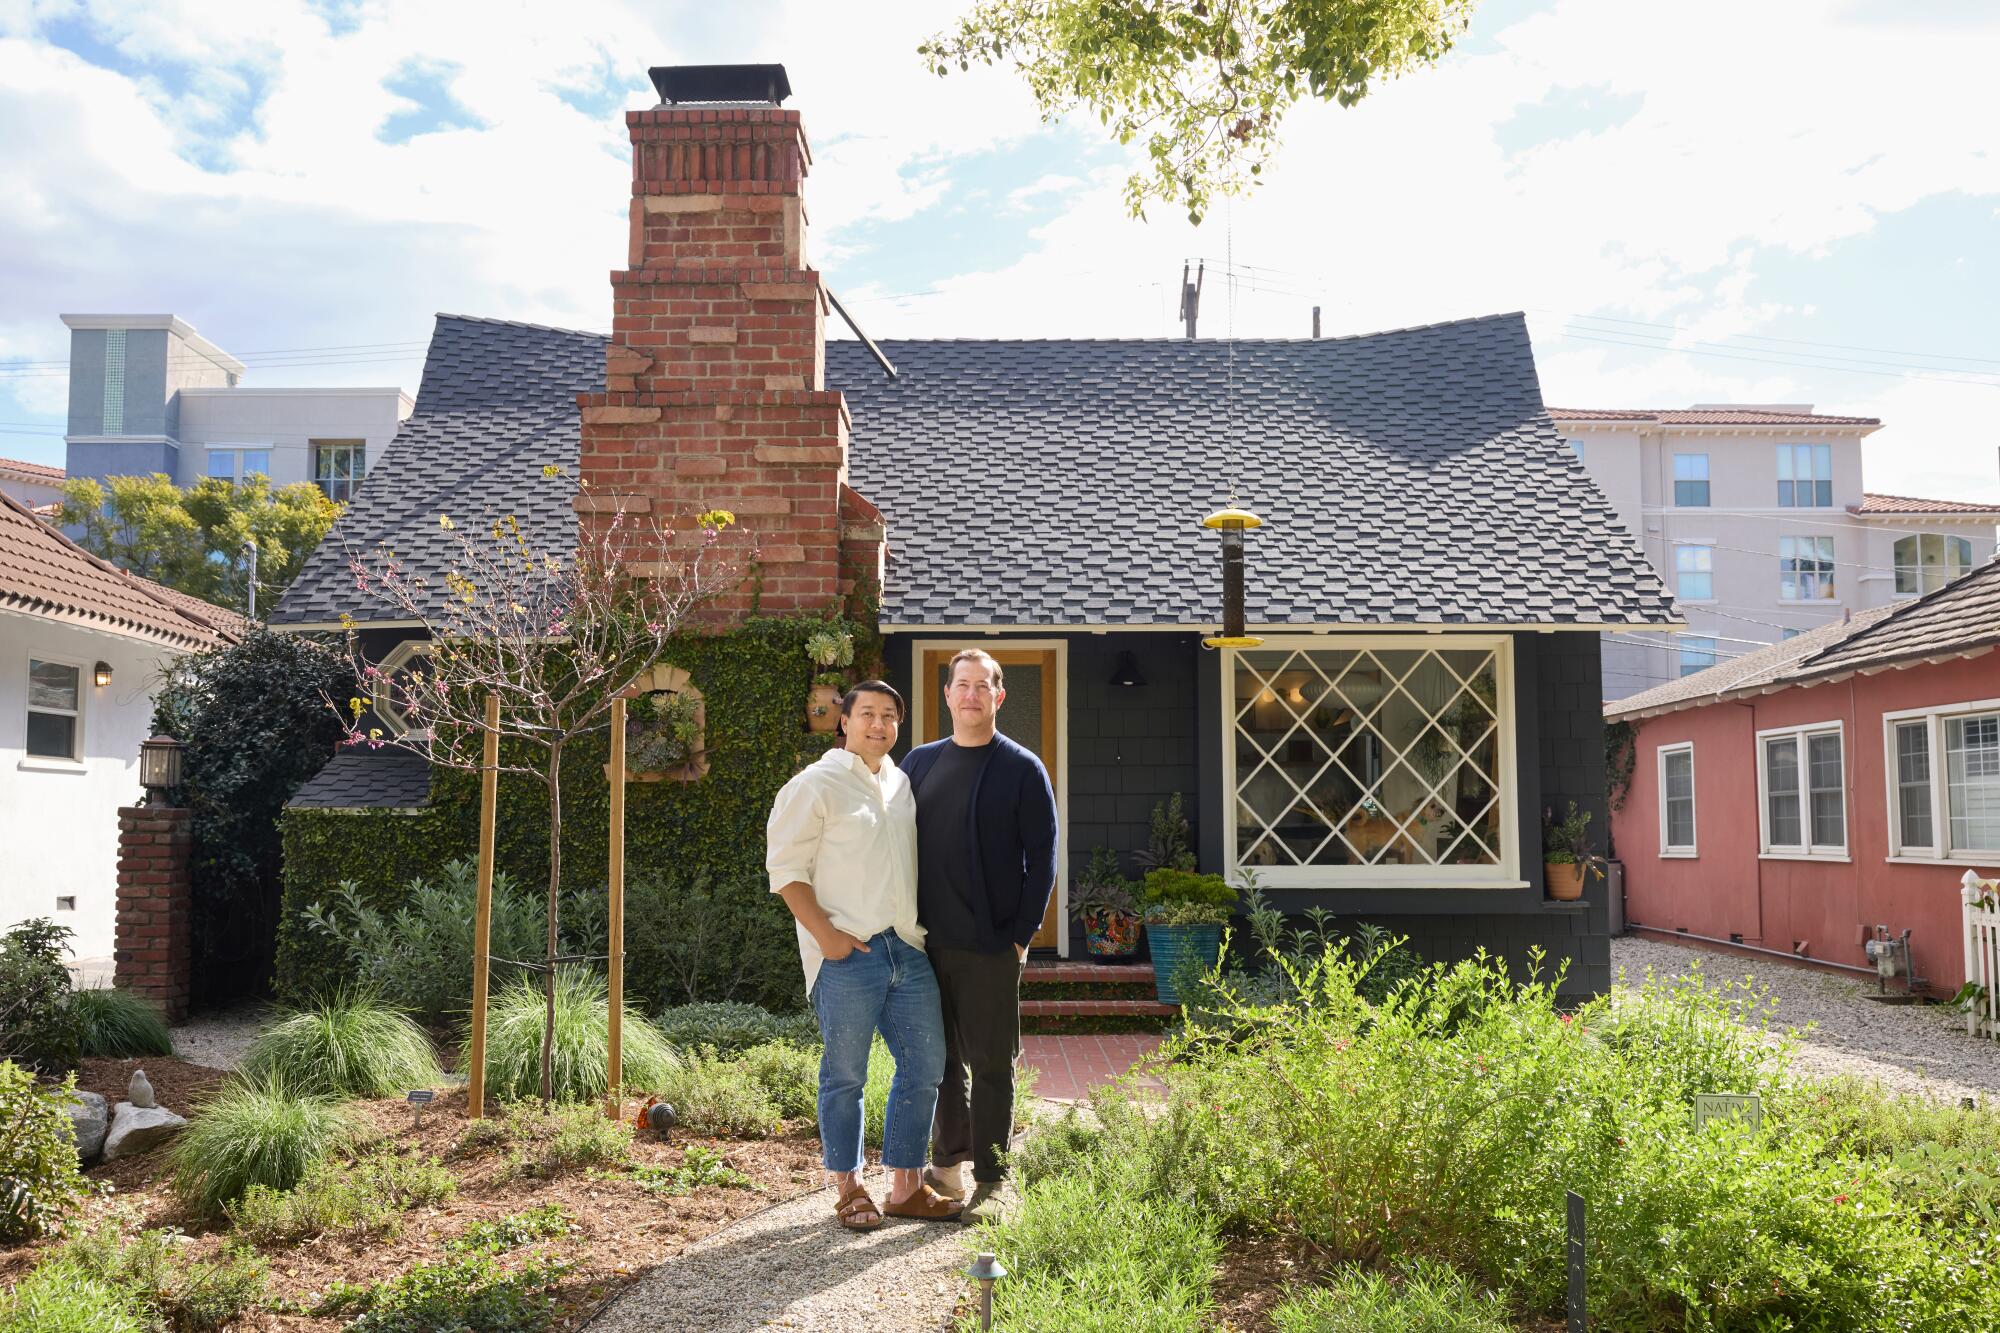 Two men standing close together in the front yard of their Storybook cottage.